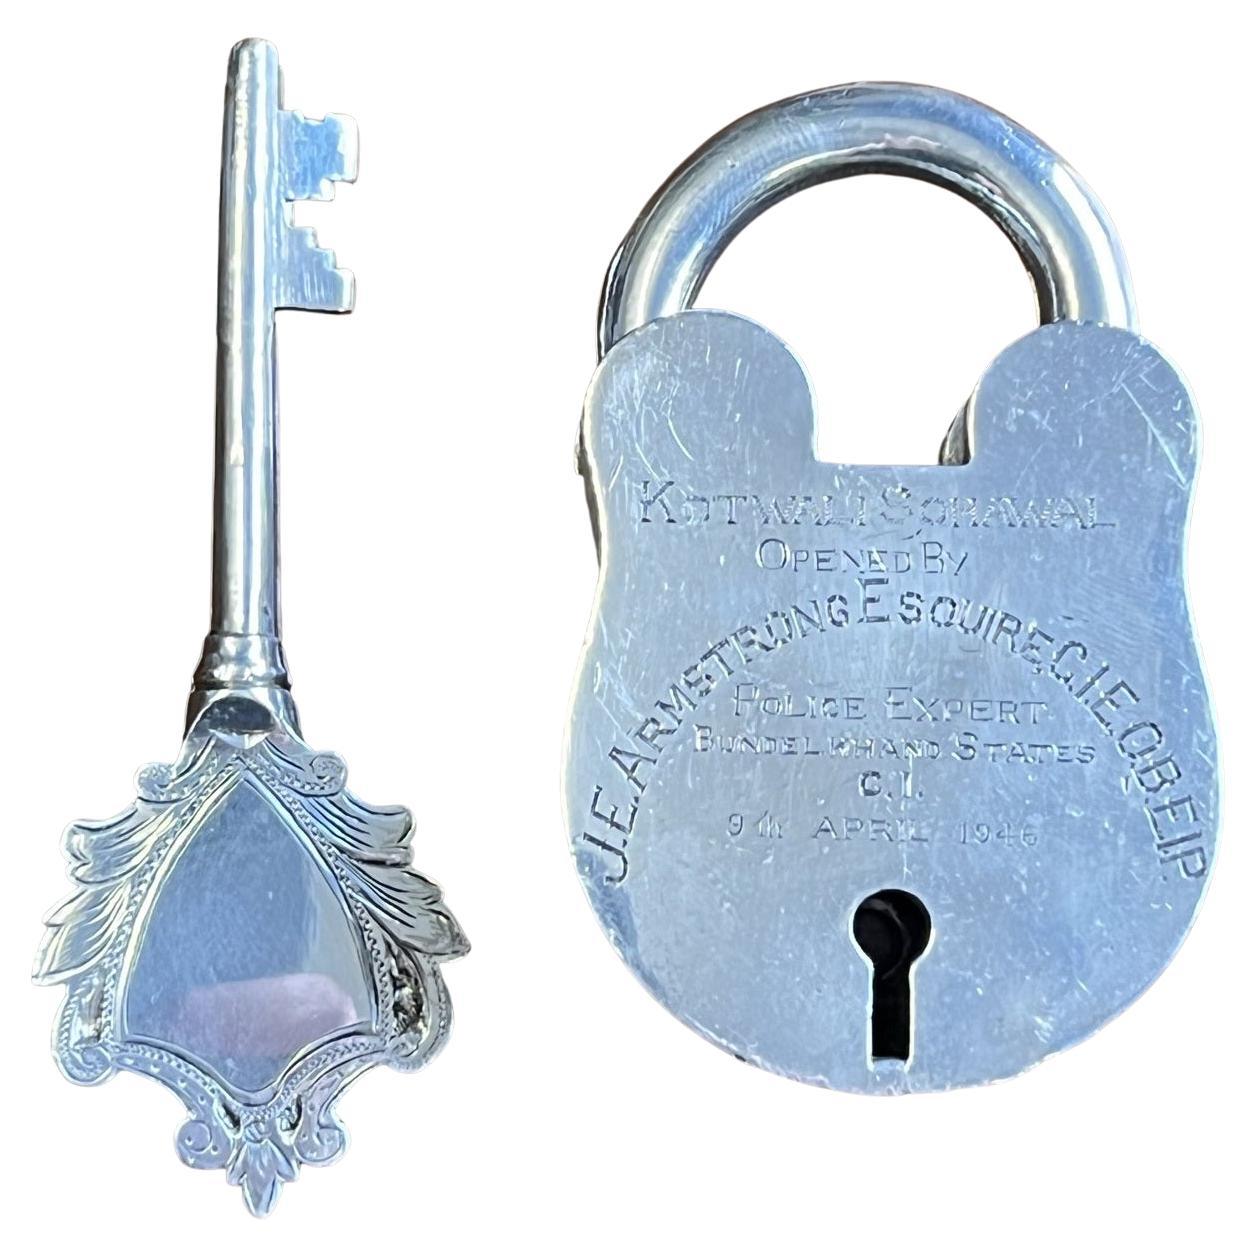 Rare Silver Plated Antique Chubbs Padlock Gifted in 1946 to Police Expert India